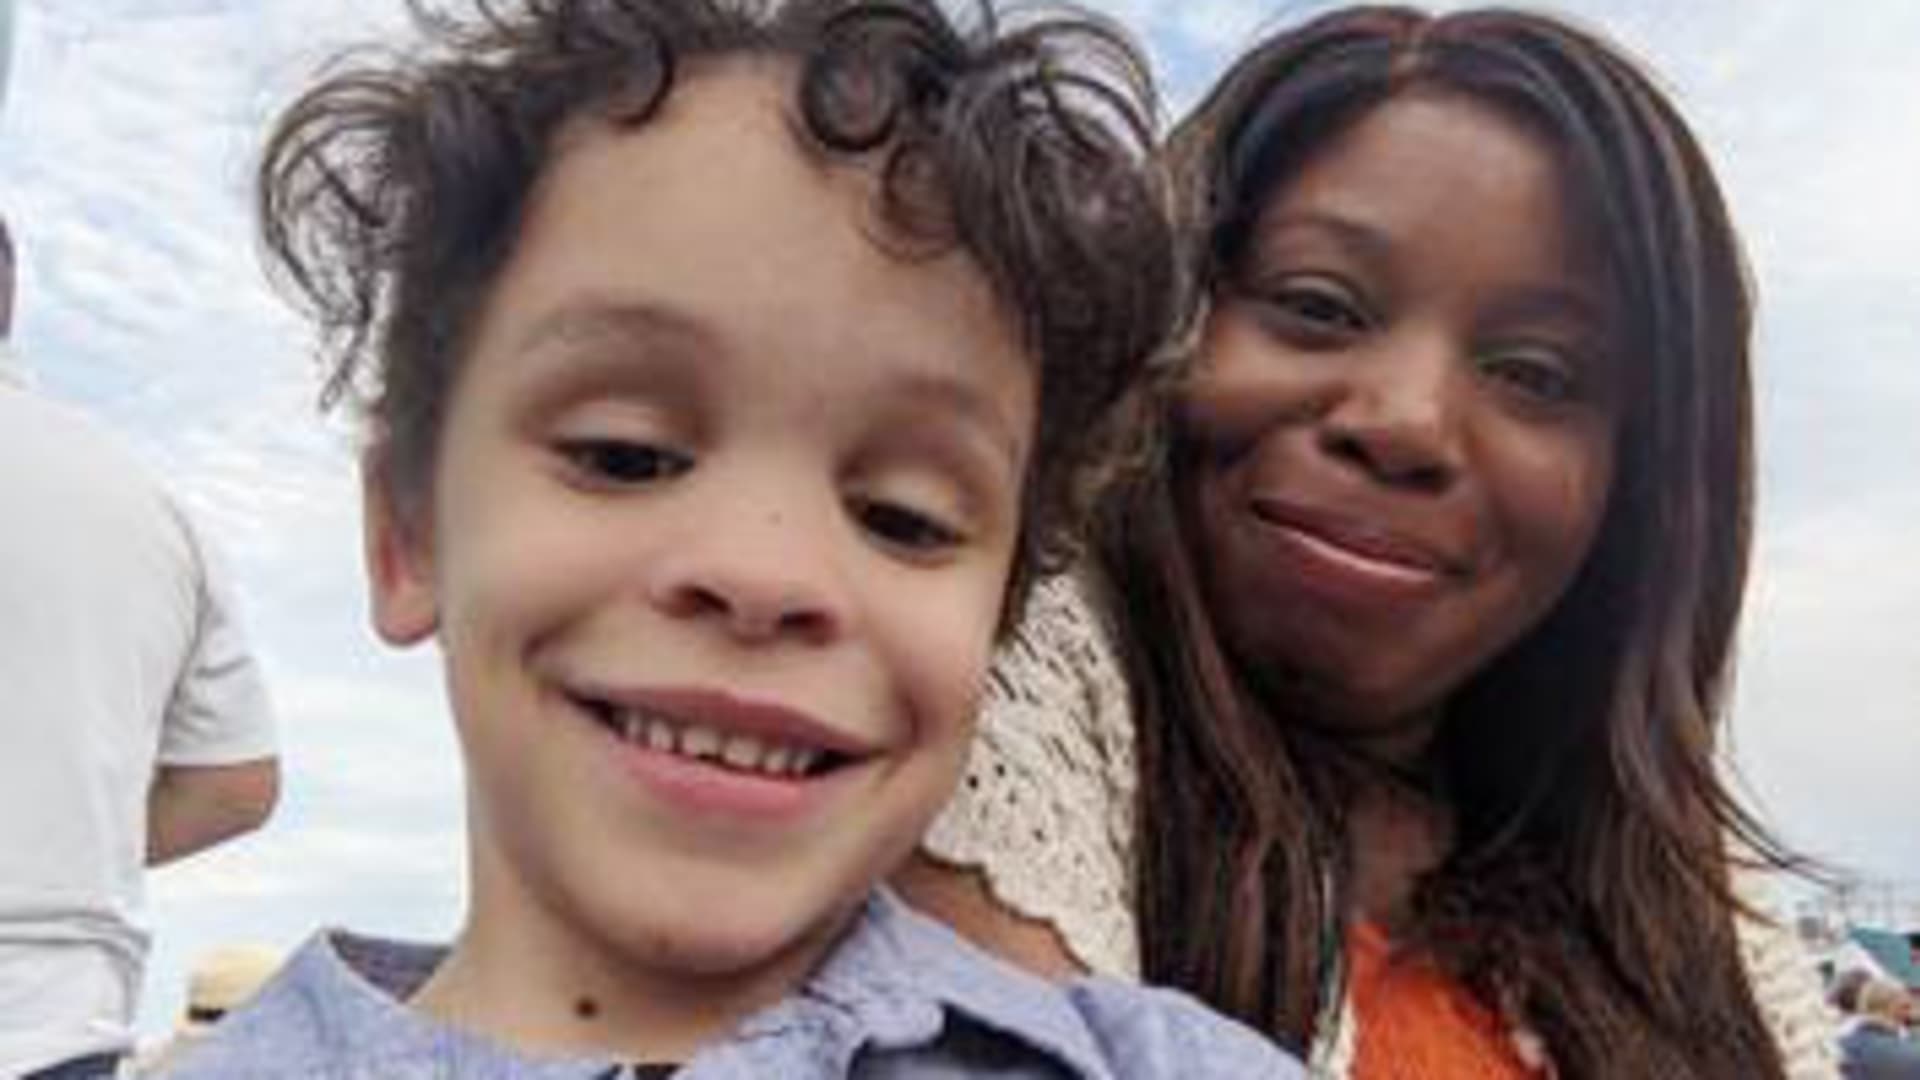 Stephanye Blakely, pictured with her son, quit her job during the pandemic and started a new career as a software engineer.